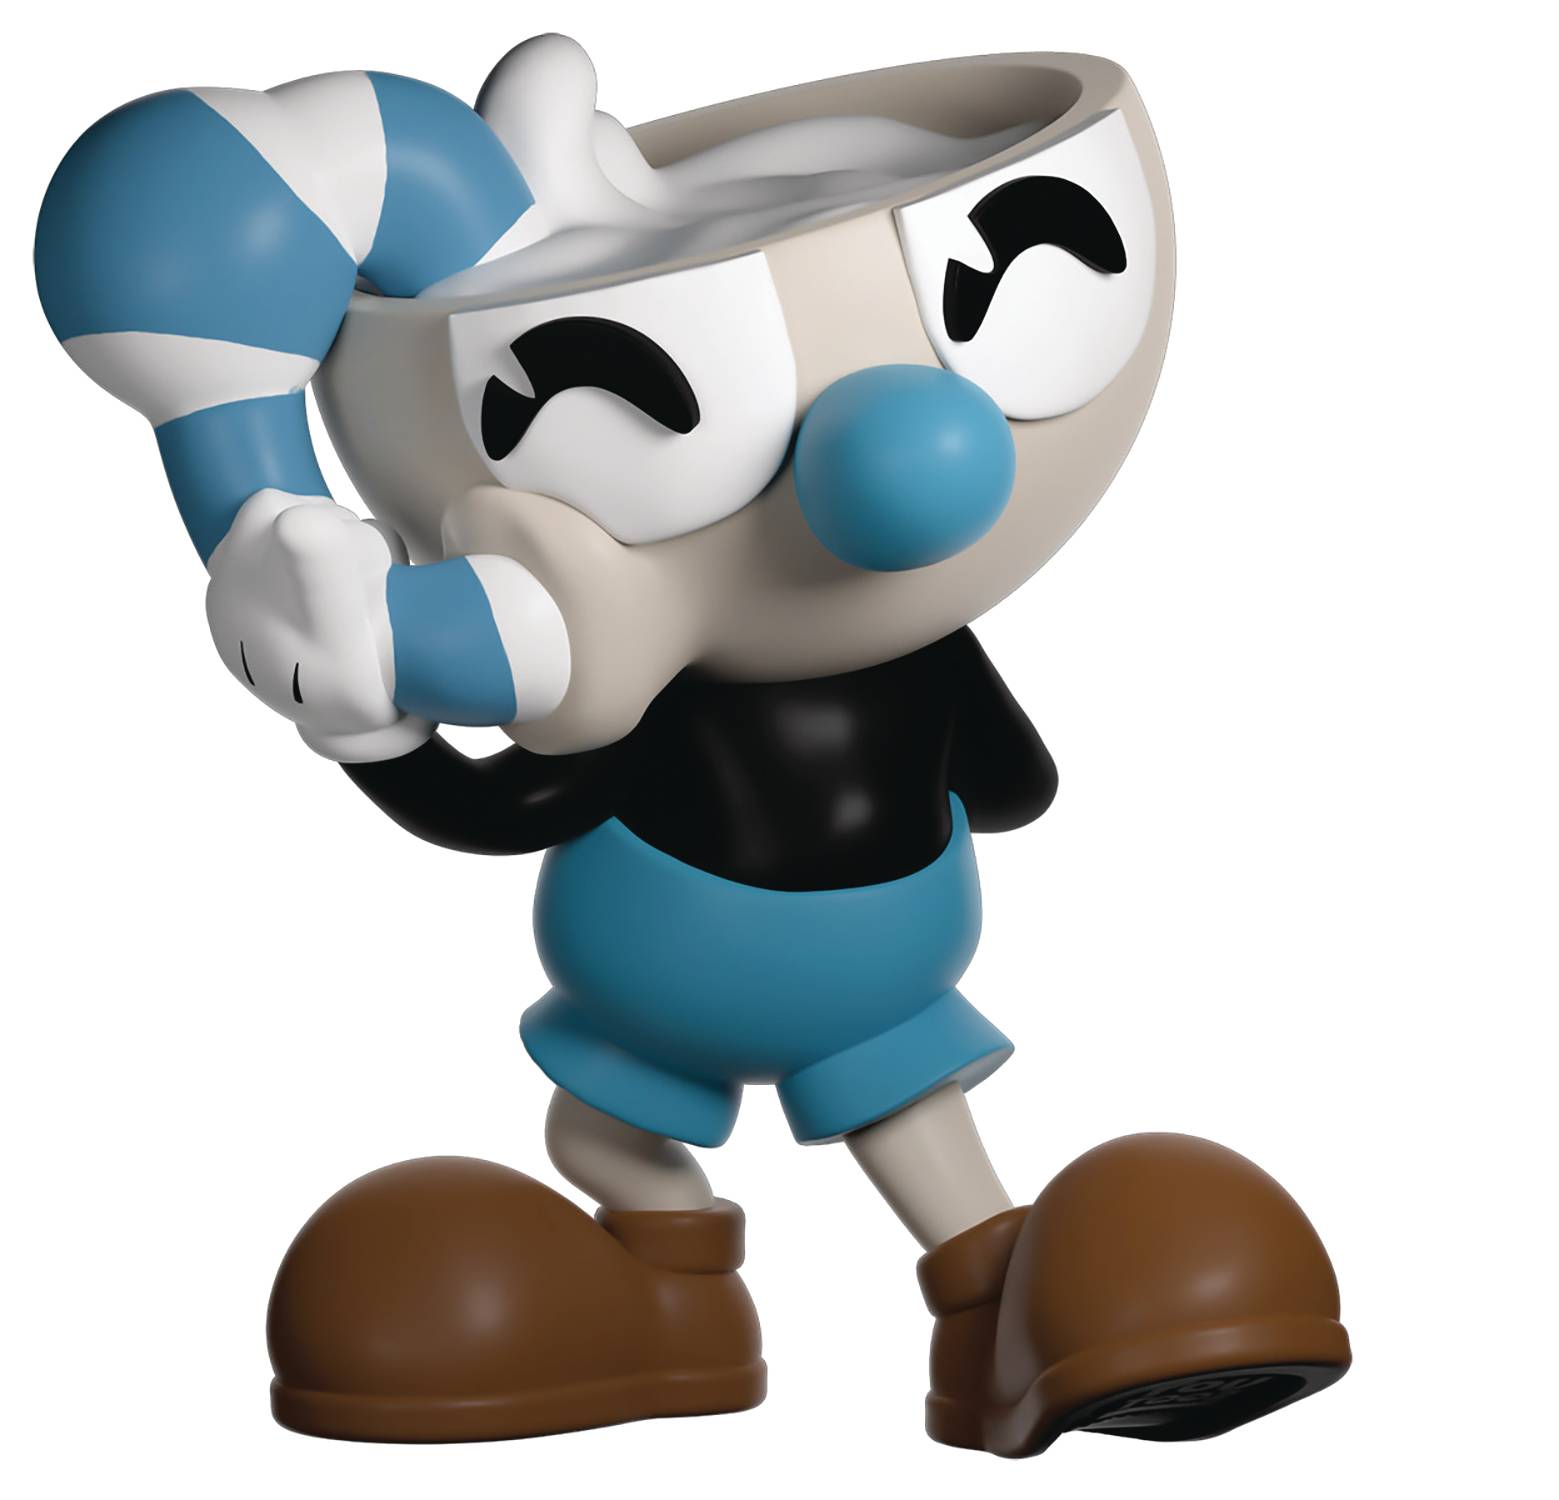 Action Figure Insider » “The Cuphead Show” Launches New